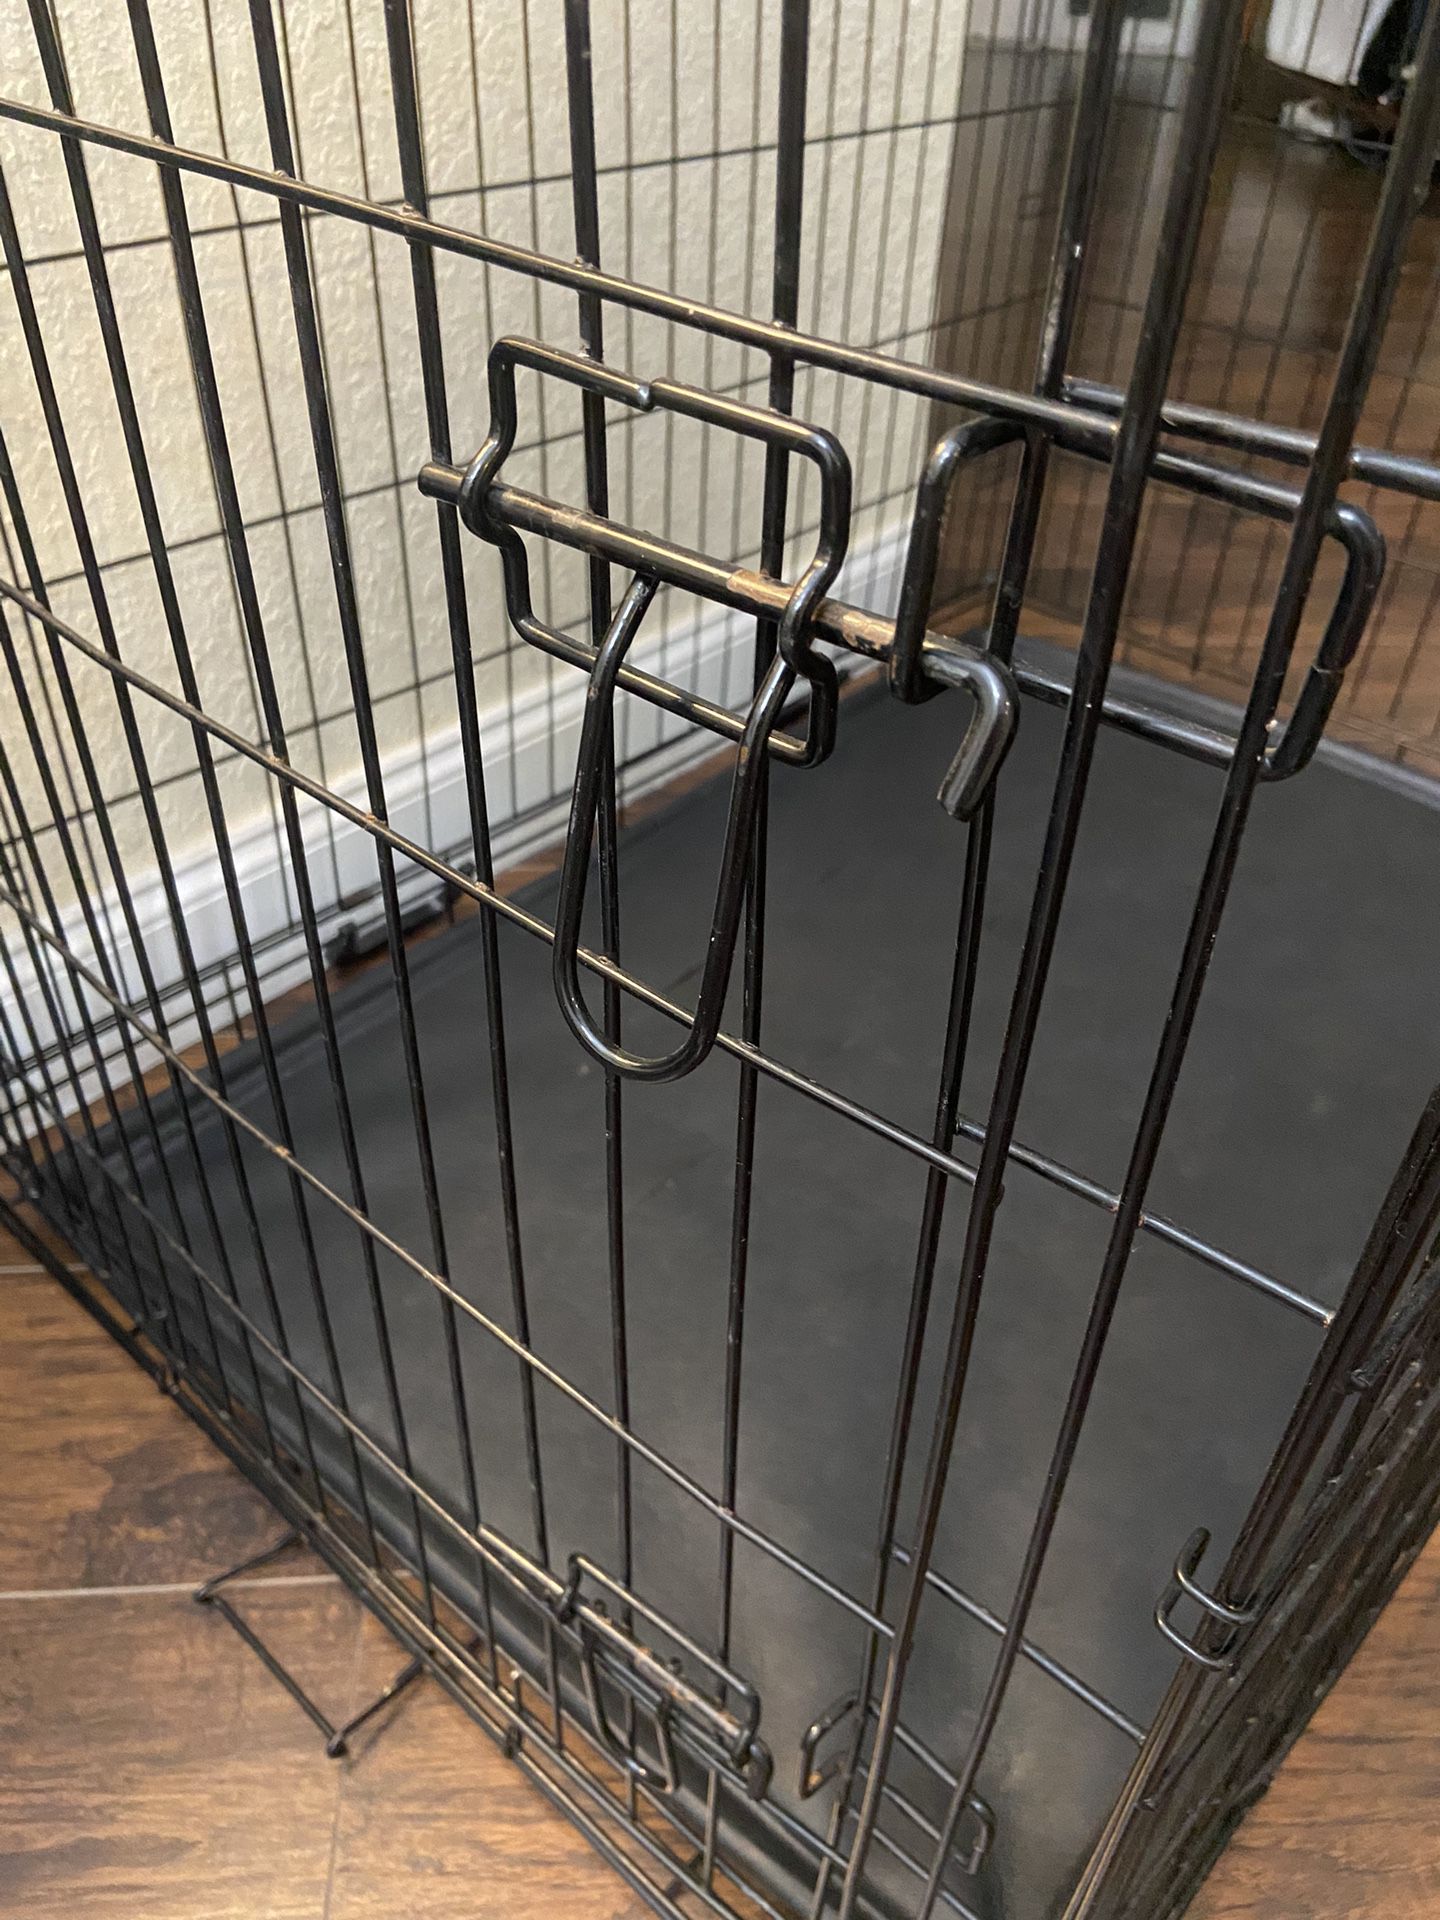 Crate Pet Carrier Large H30”, D28”, W42”. 2 doors. Foldable. In Boca Raton